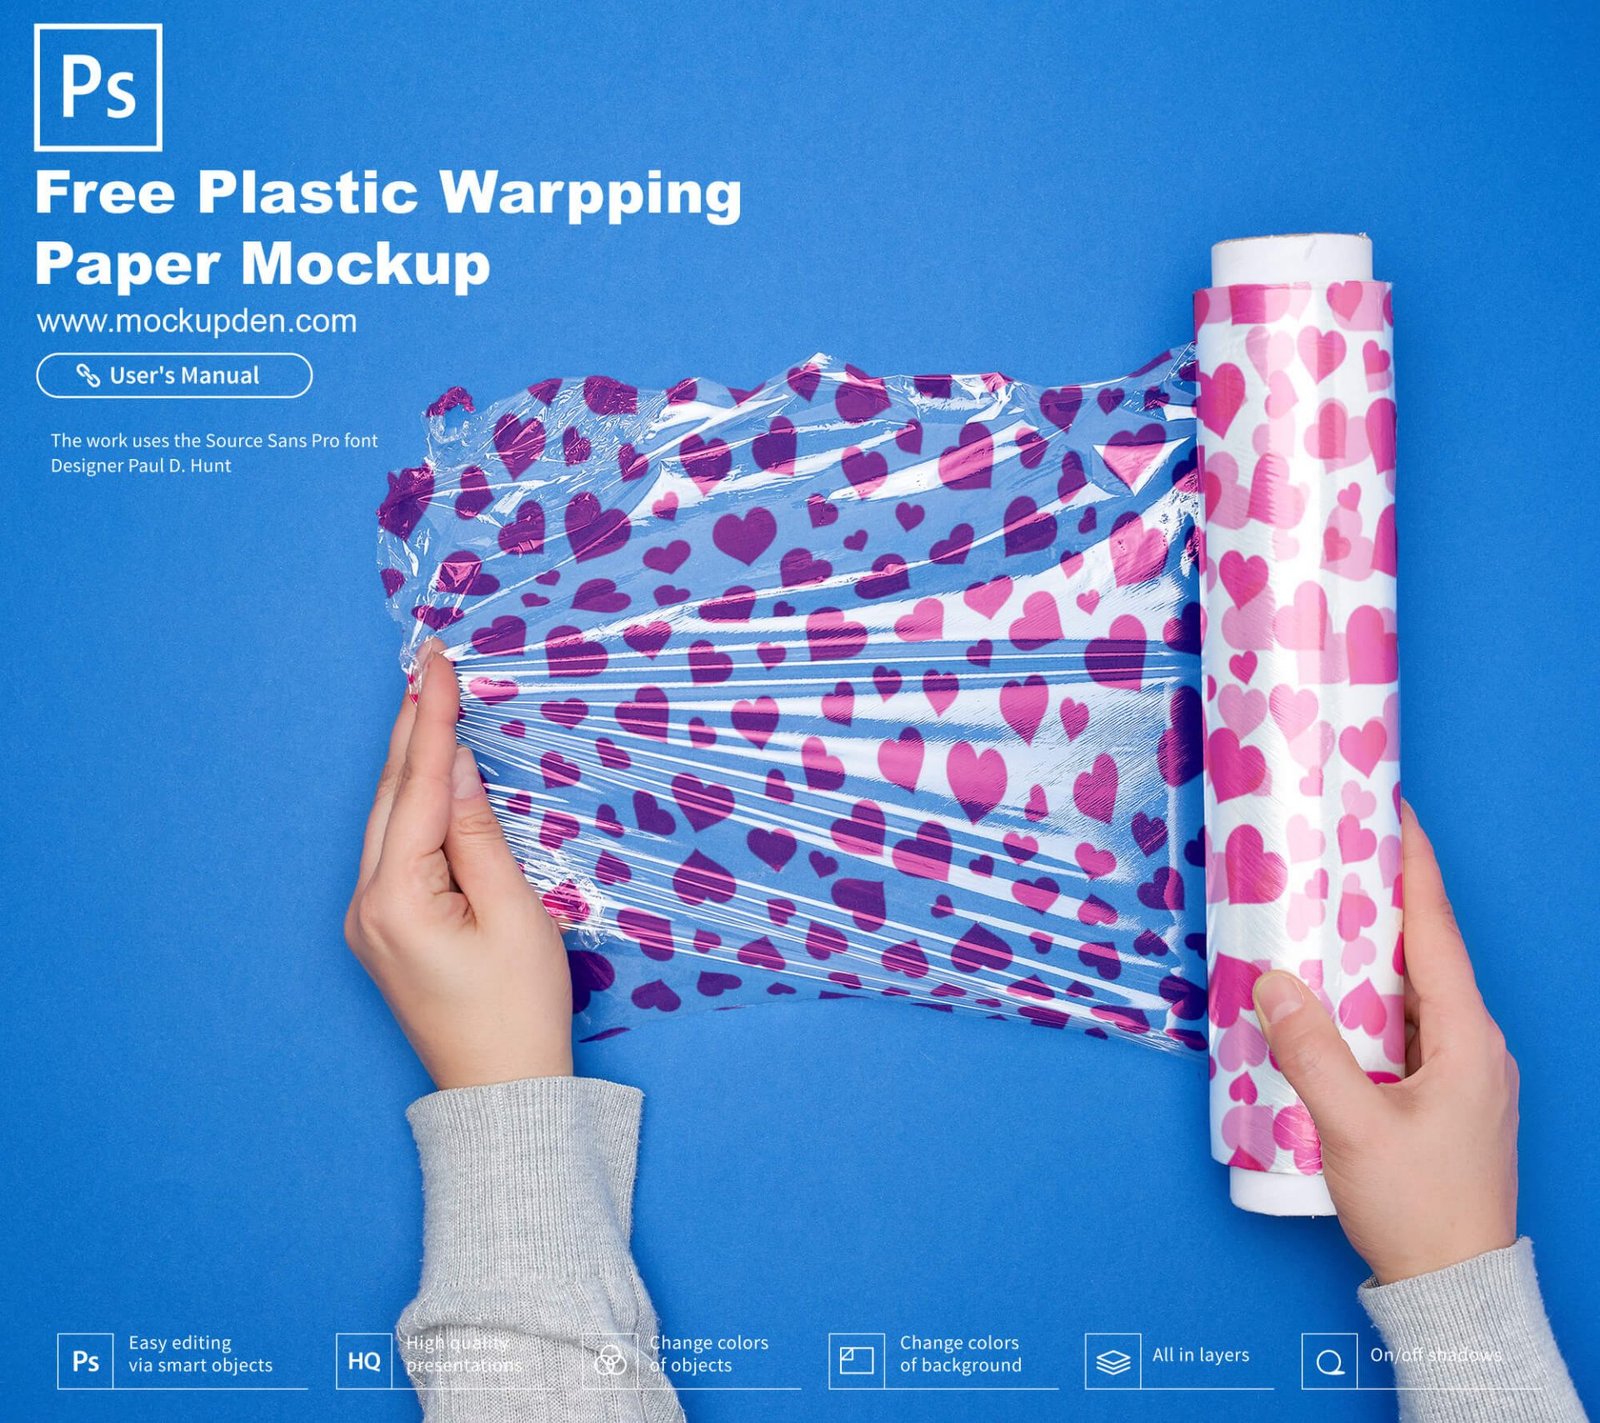 Download Free Plastic Wrapping Paper Mockup PSD Template | Mockup Den